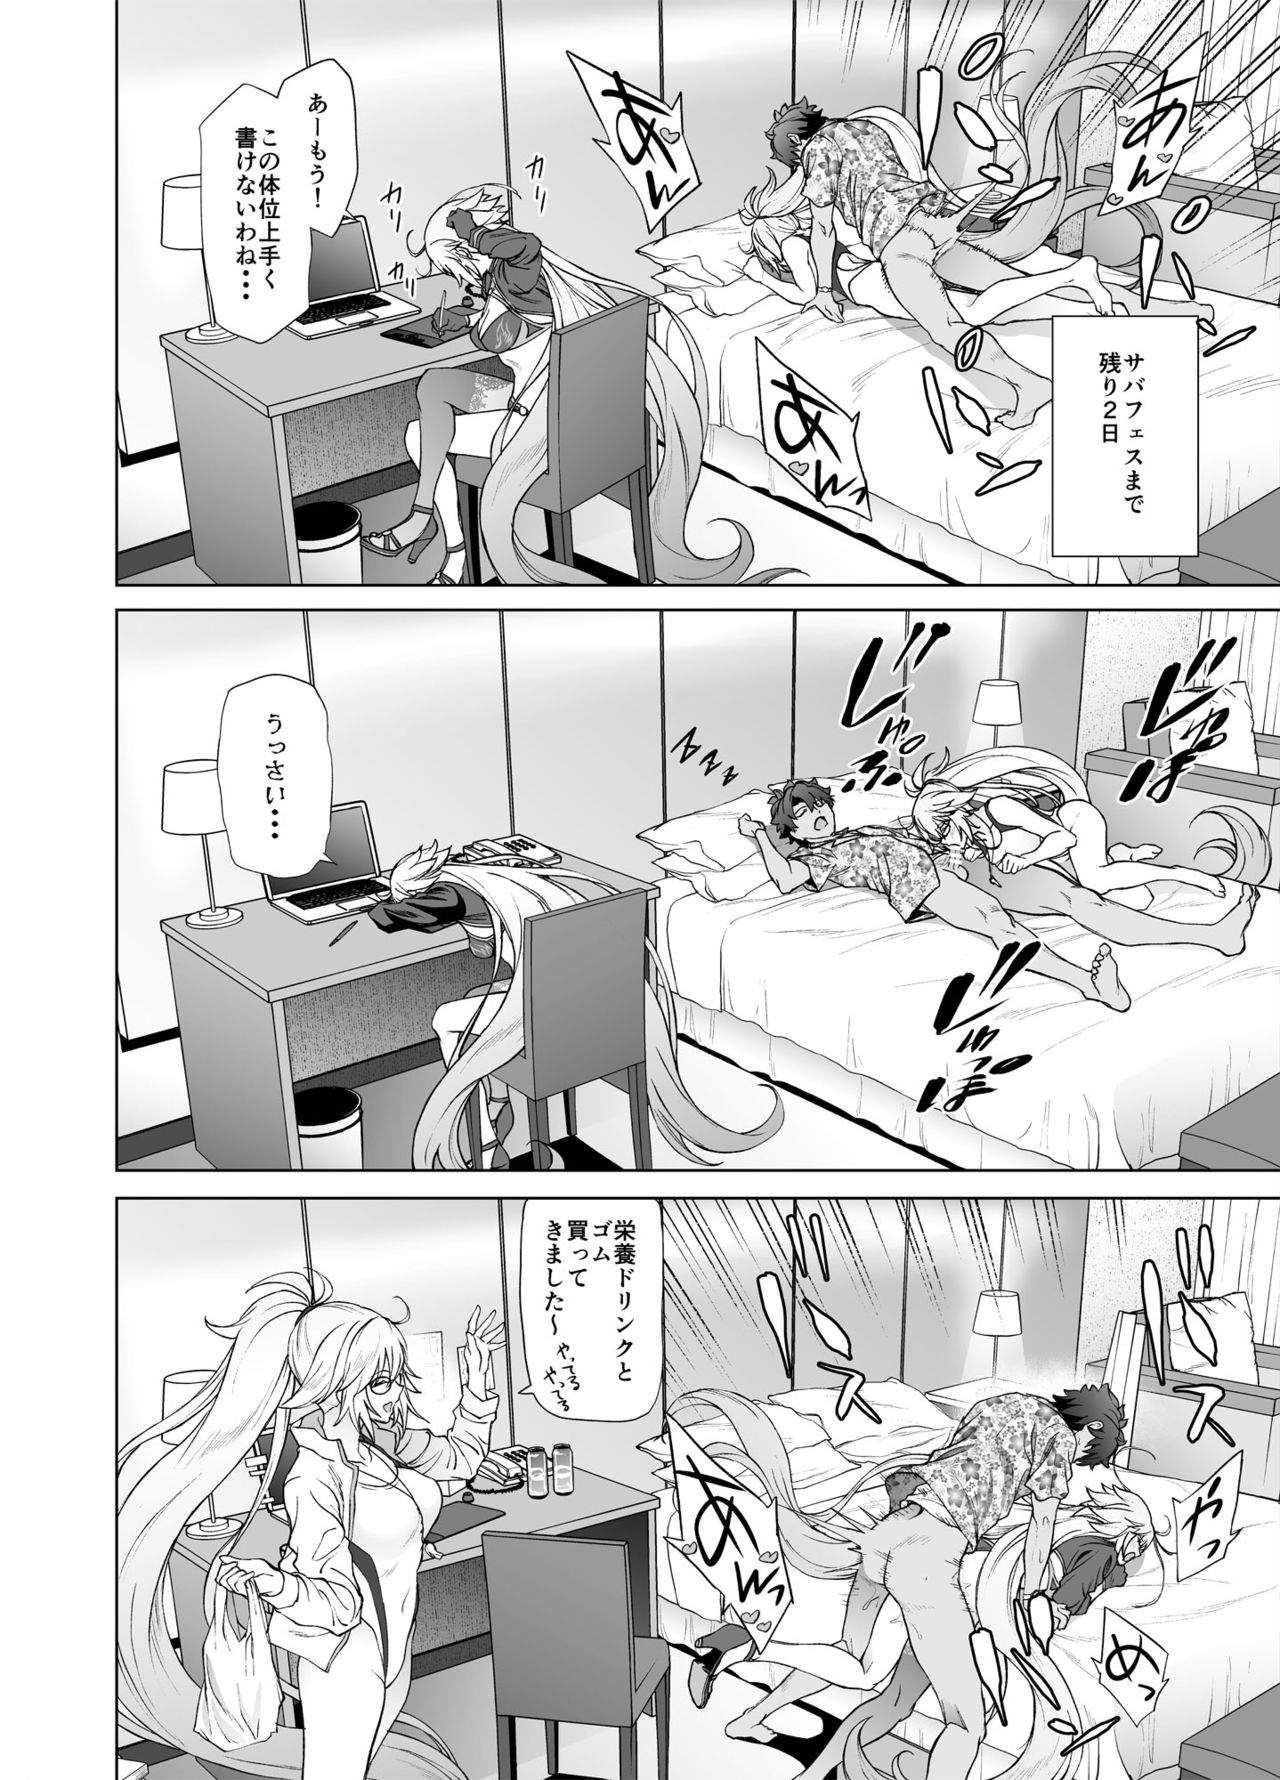 [EXTENDED PART (Endo Yoshiki)] Jeanne W (Fate/Grand Order) [Digital] page 23 full